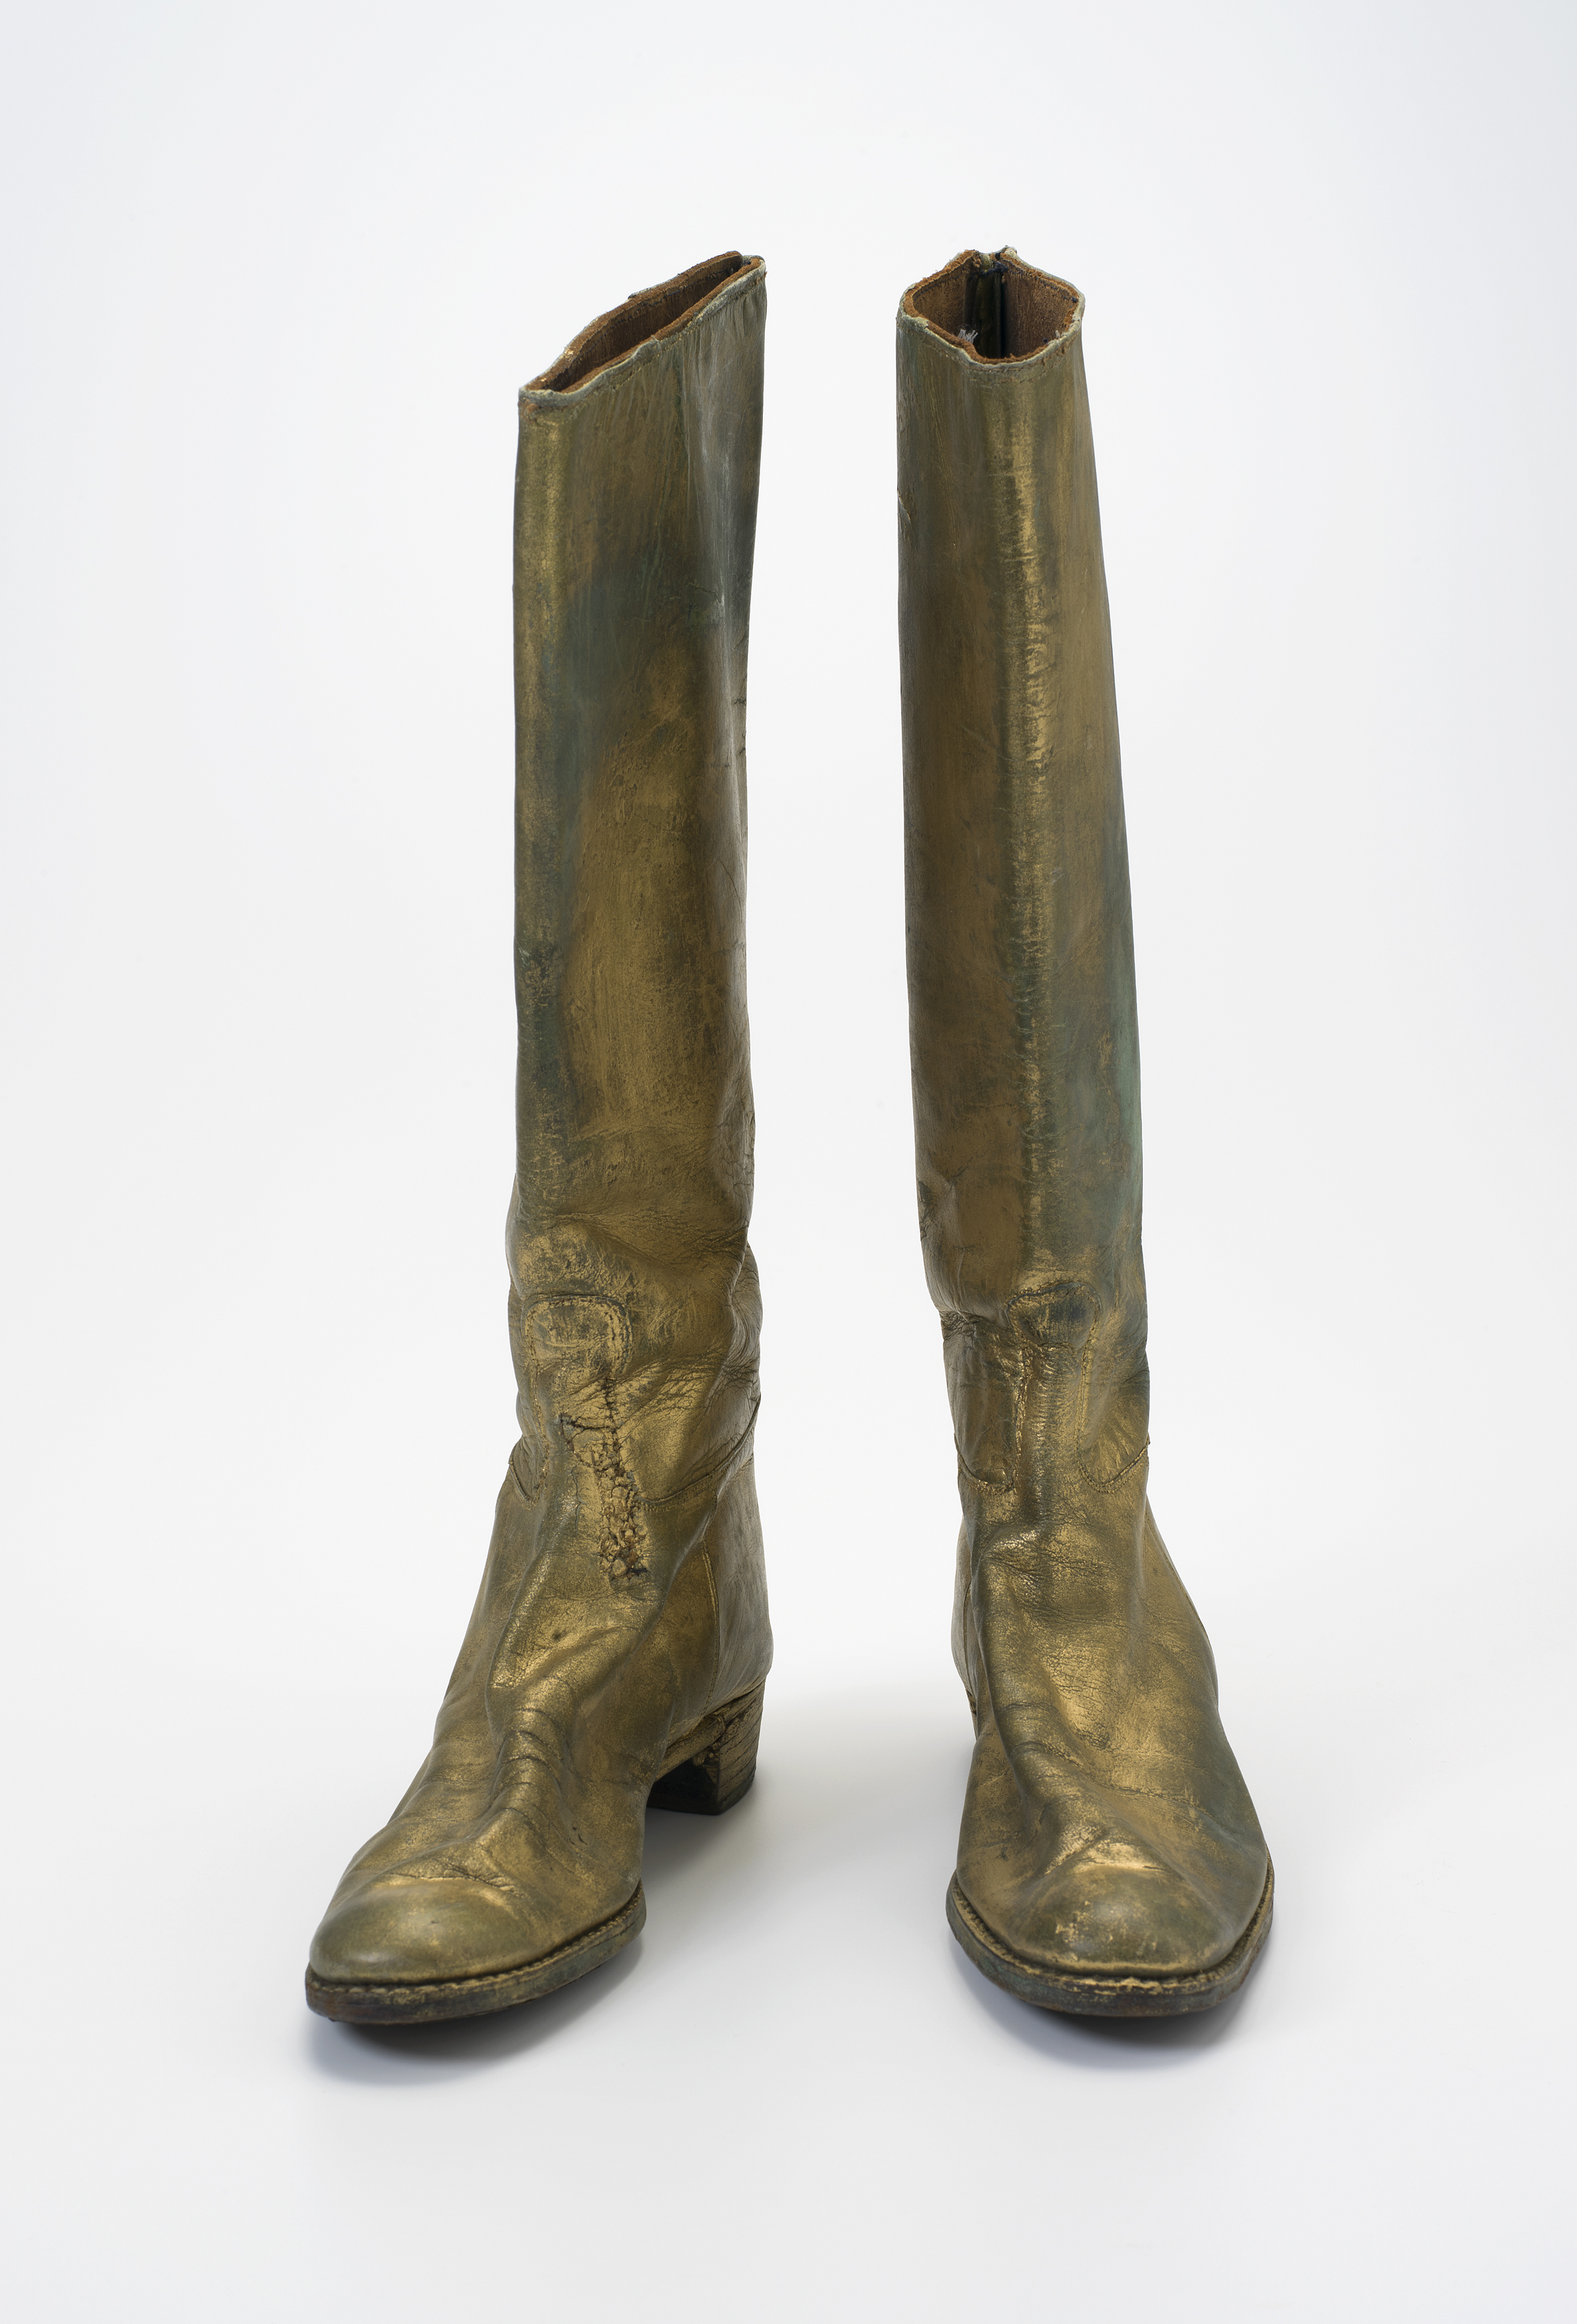 Pair of womens riding boots worn by Eileen Wirth of Wirths Circus